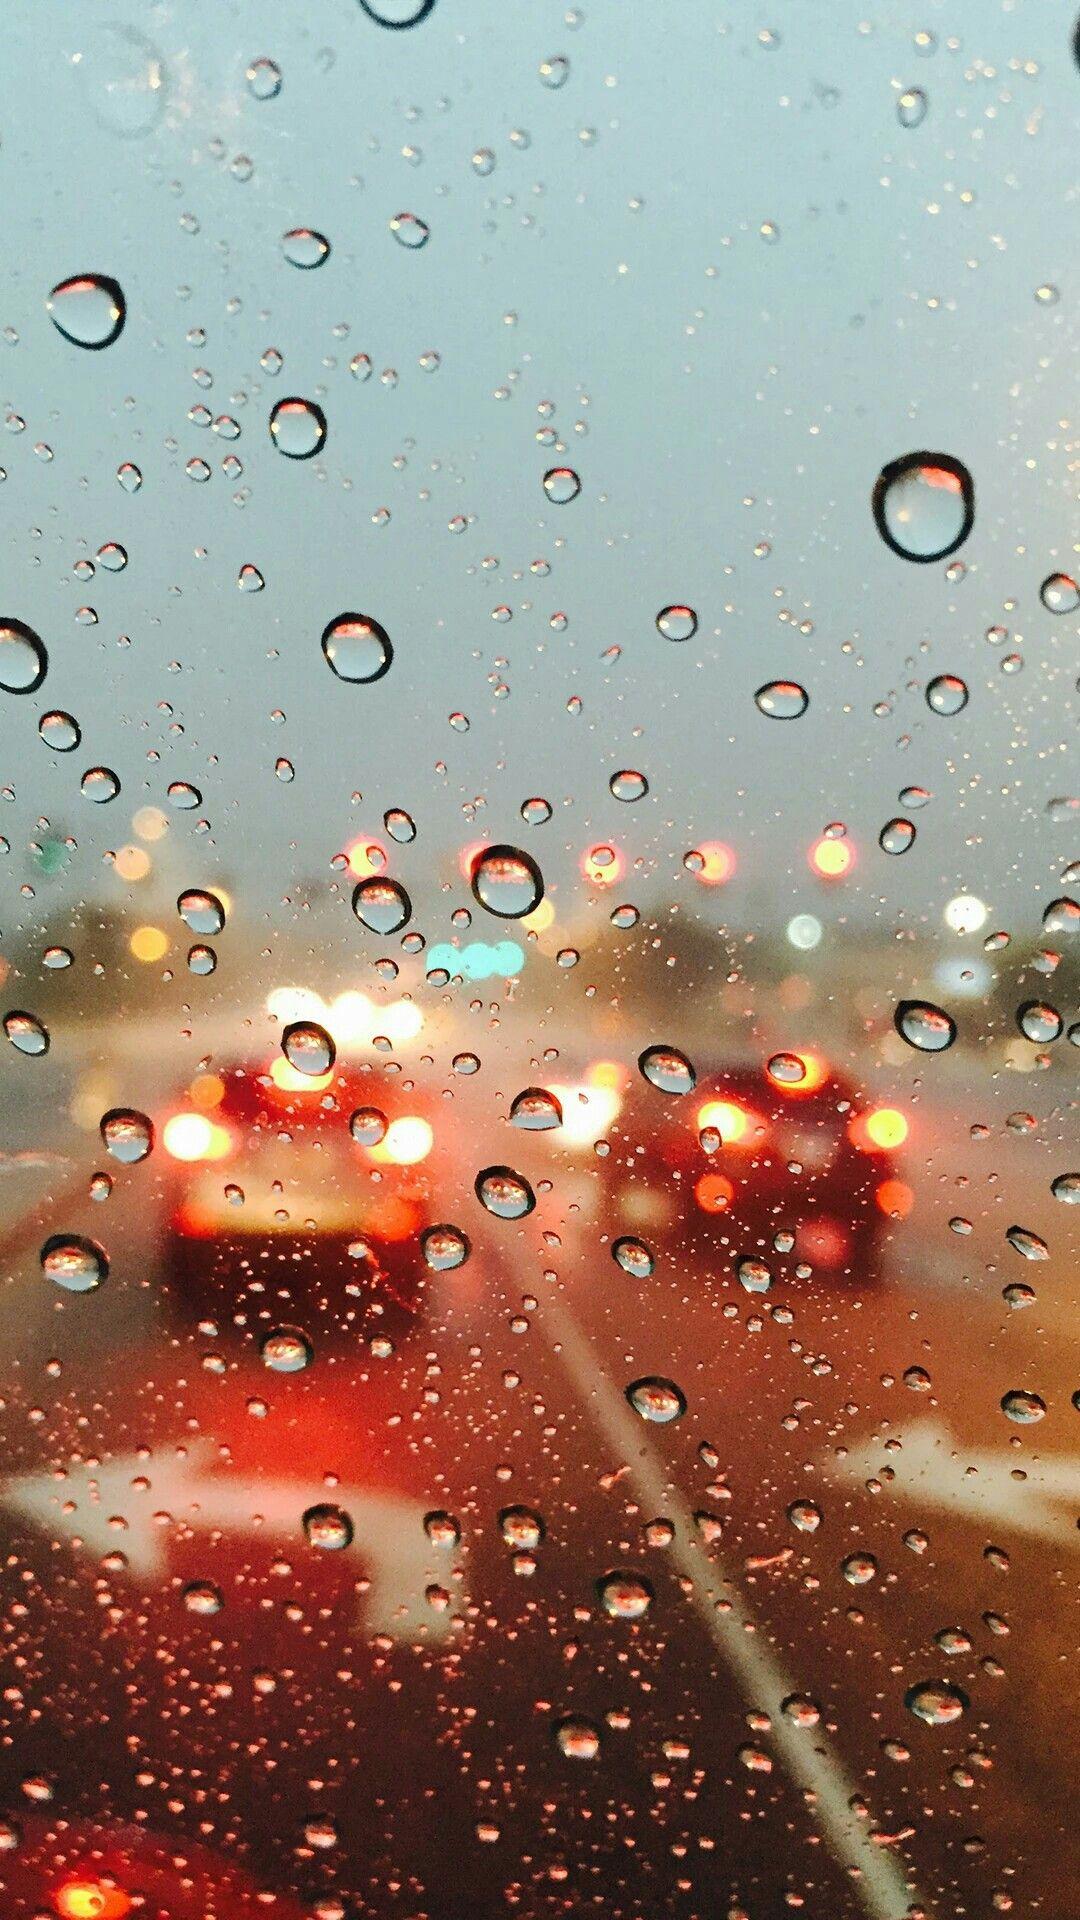 Photography of Window View and raindrops during a raining